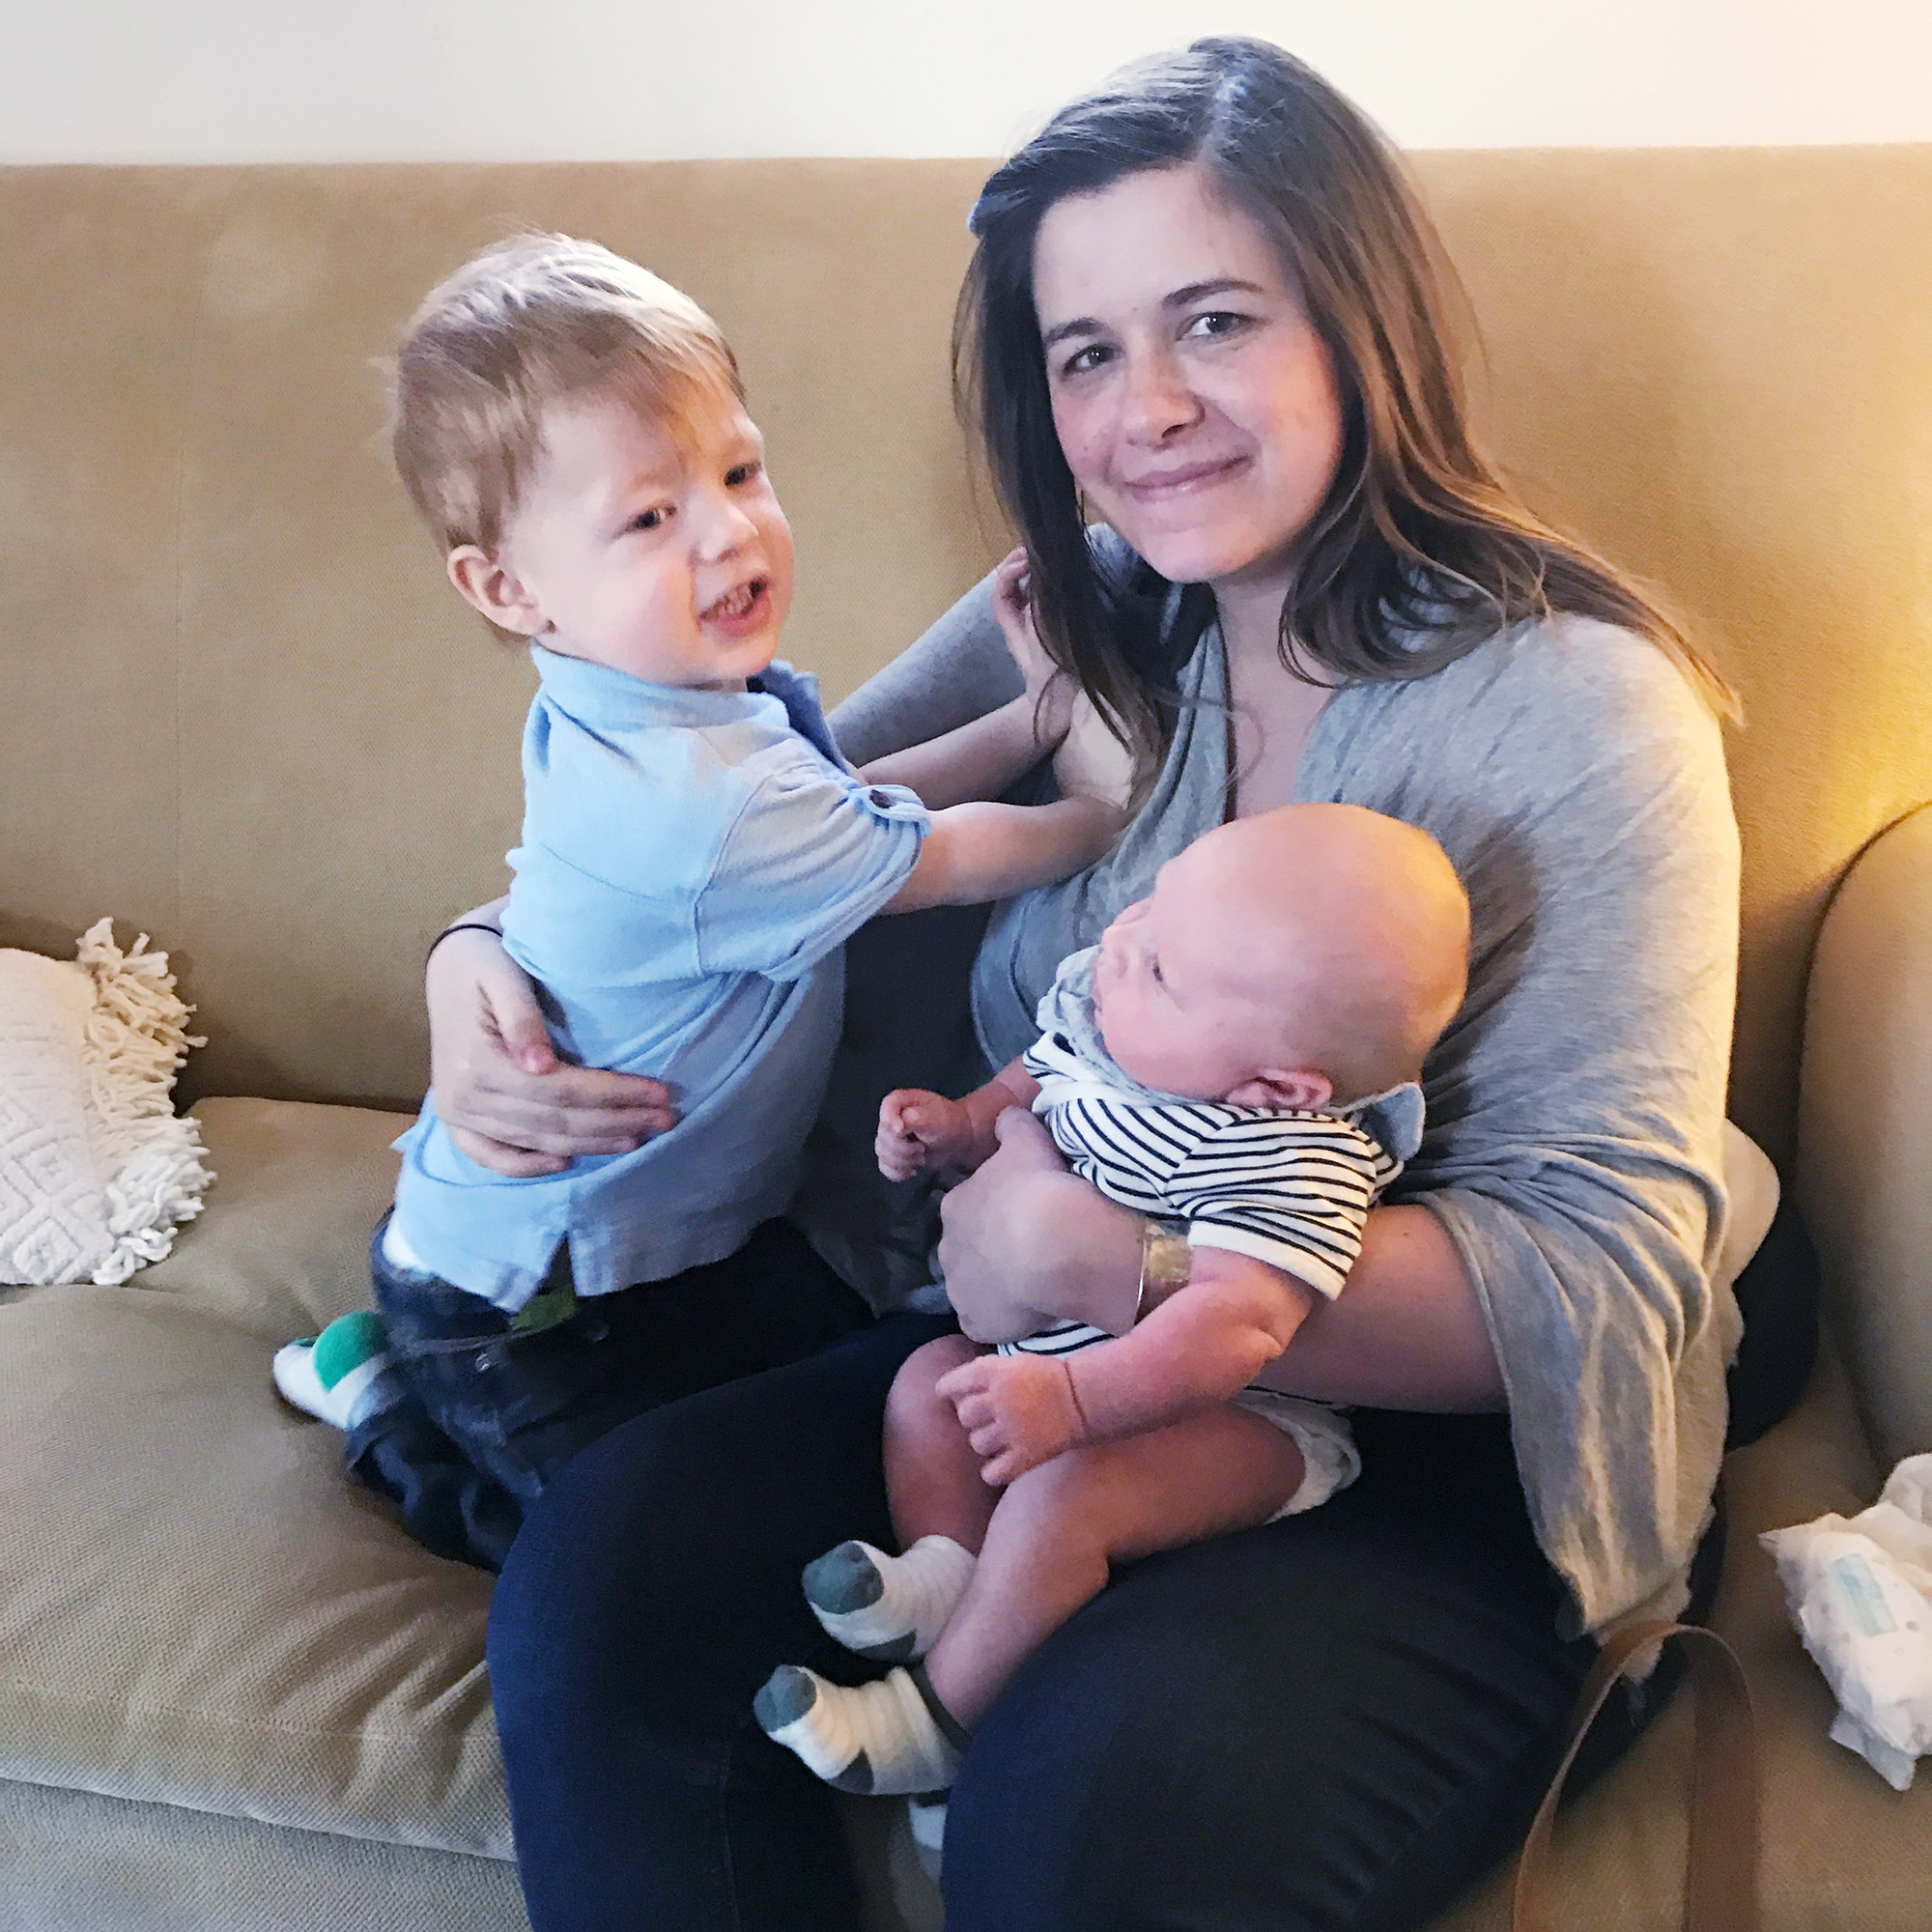 PHOTO: Ashley Abramson, a mom of two from Minneapolis, is seen in this undated photo with her sons, Oliver, 4, and Miles who is now 2.